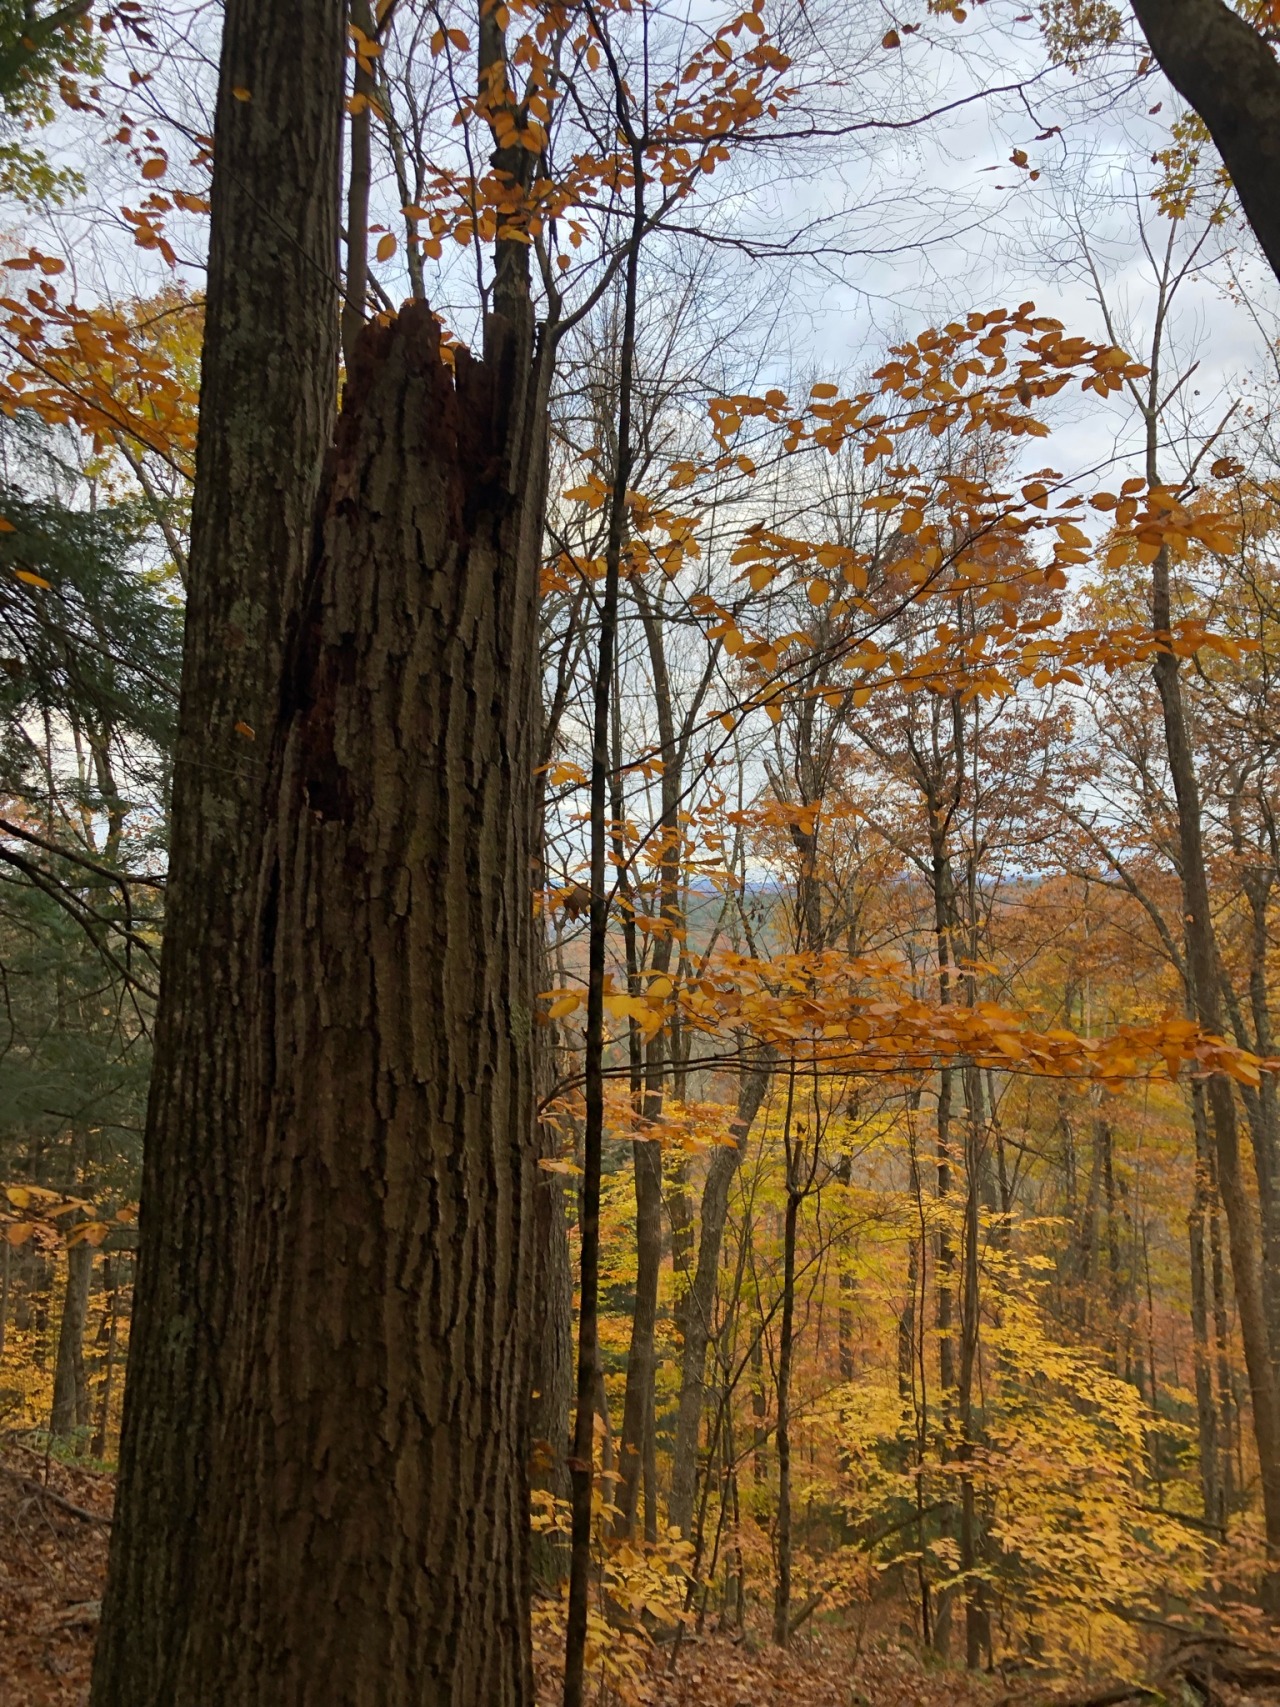 a shot of the forest . on the left is a brown snag reaching about 3/4 way up photo . in bg is skinny orange and yellow leafed trees and cloudy gray sky